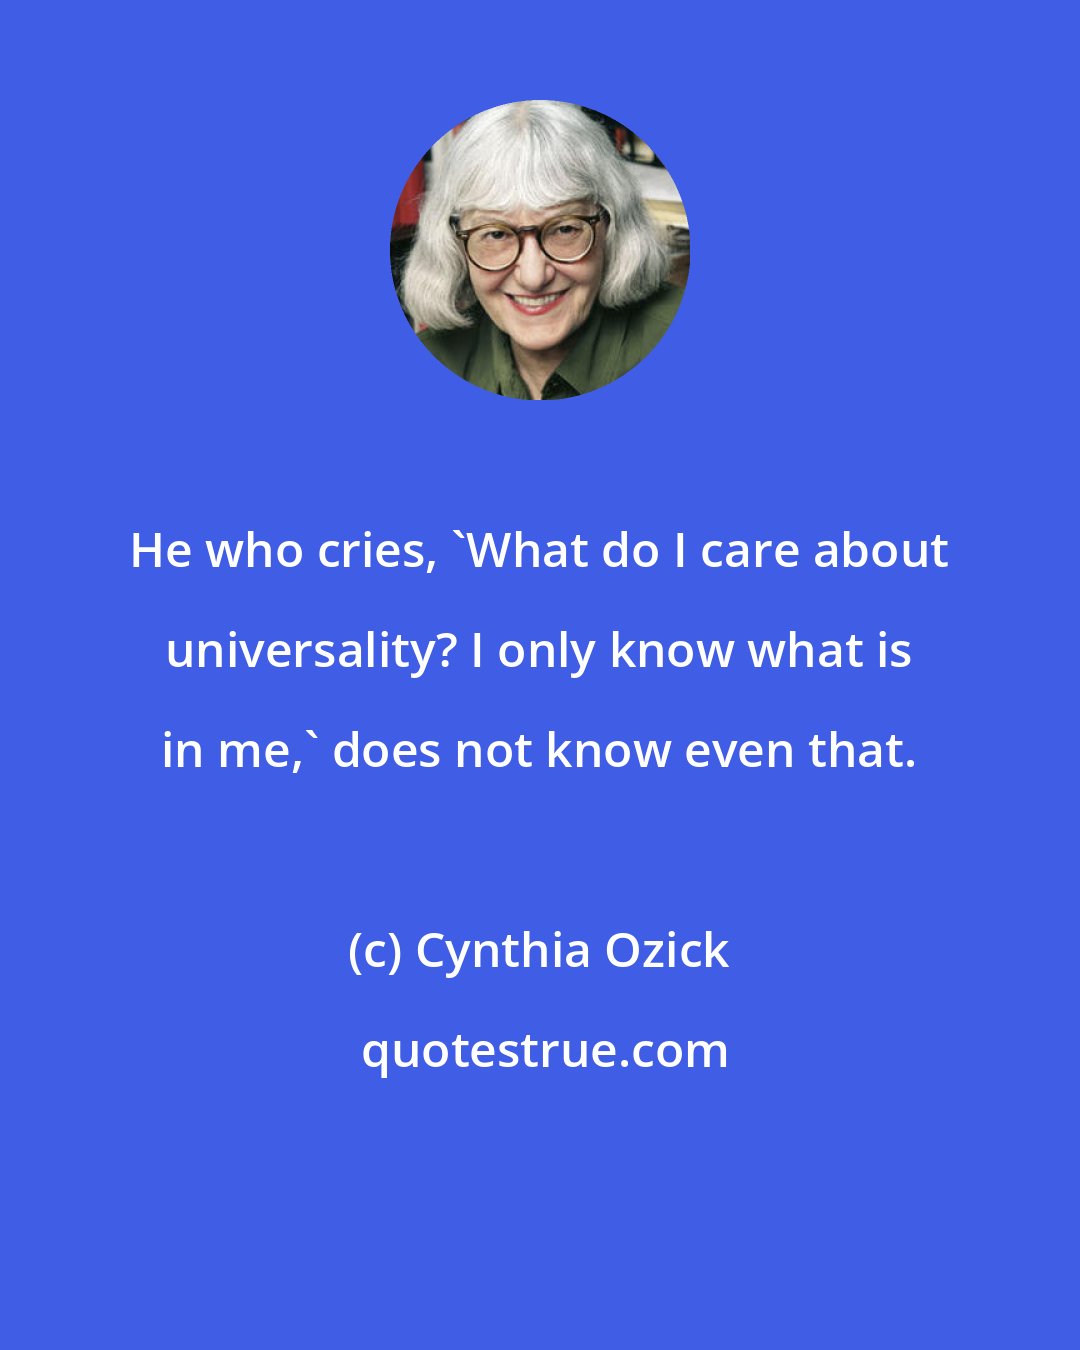 Cynthia Ozick: He who cries, 'What do I care about universality? I only know what is in me,' does not know even that.